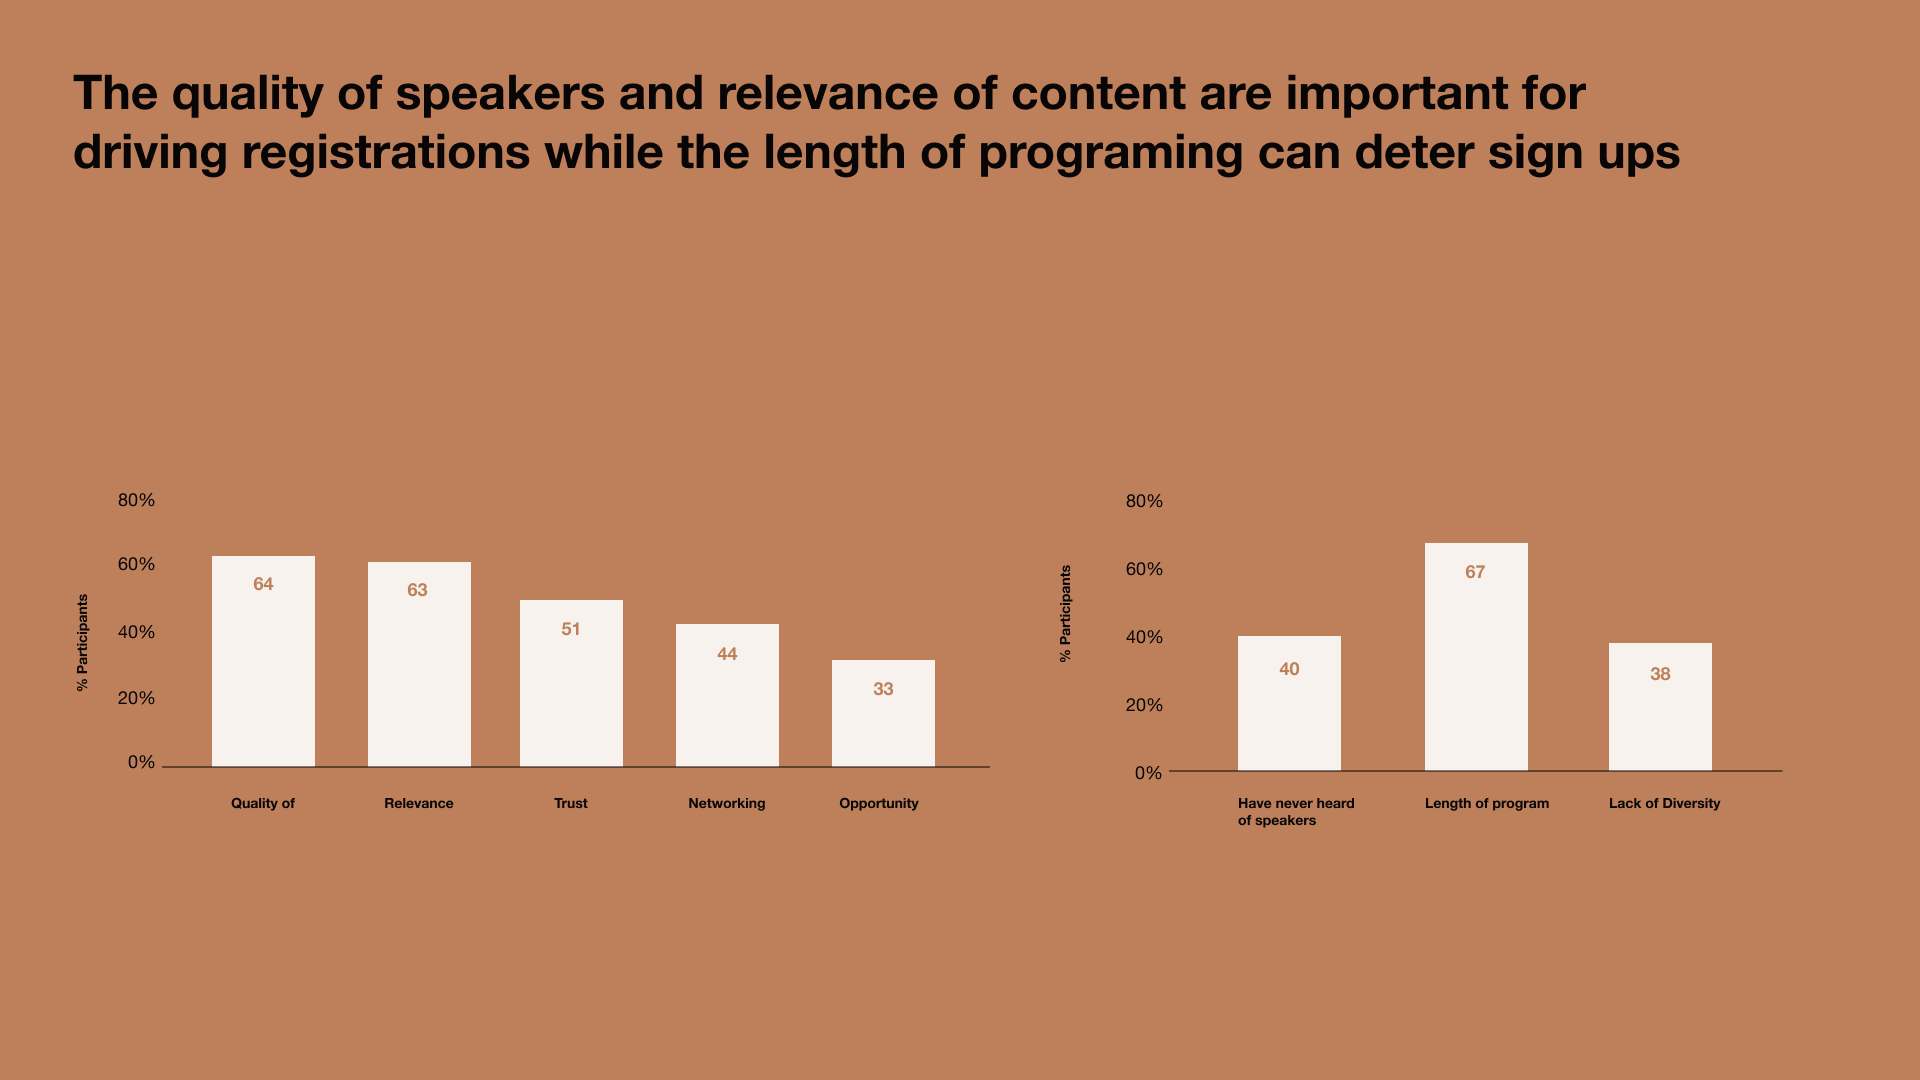 Relevance of content and speakers is key when driving registrations